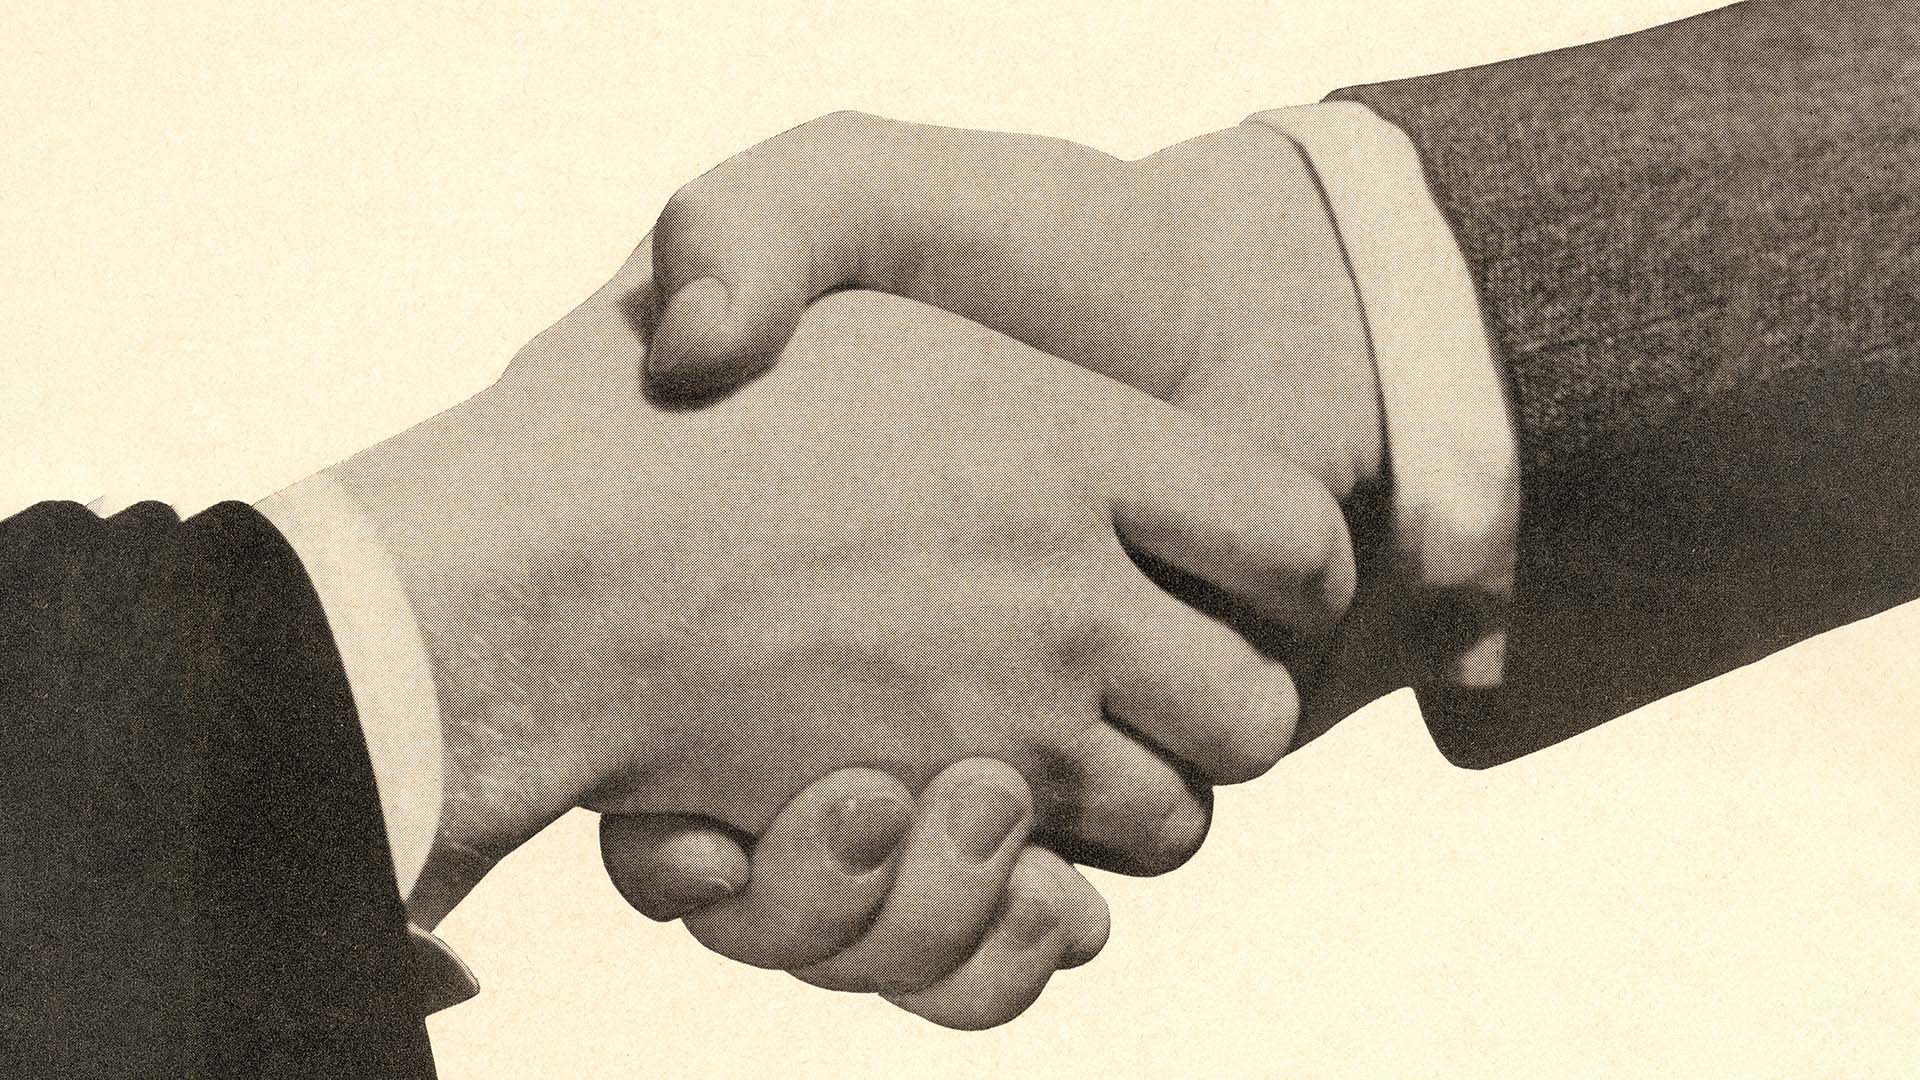 4 Strategic Partnerships That Paired Wildly Different Companies